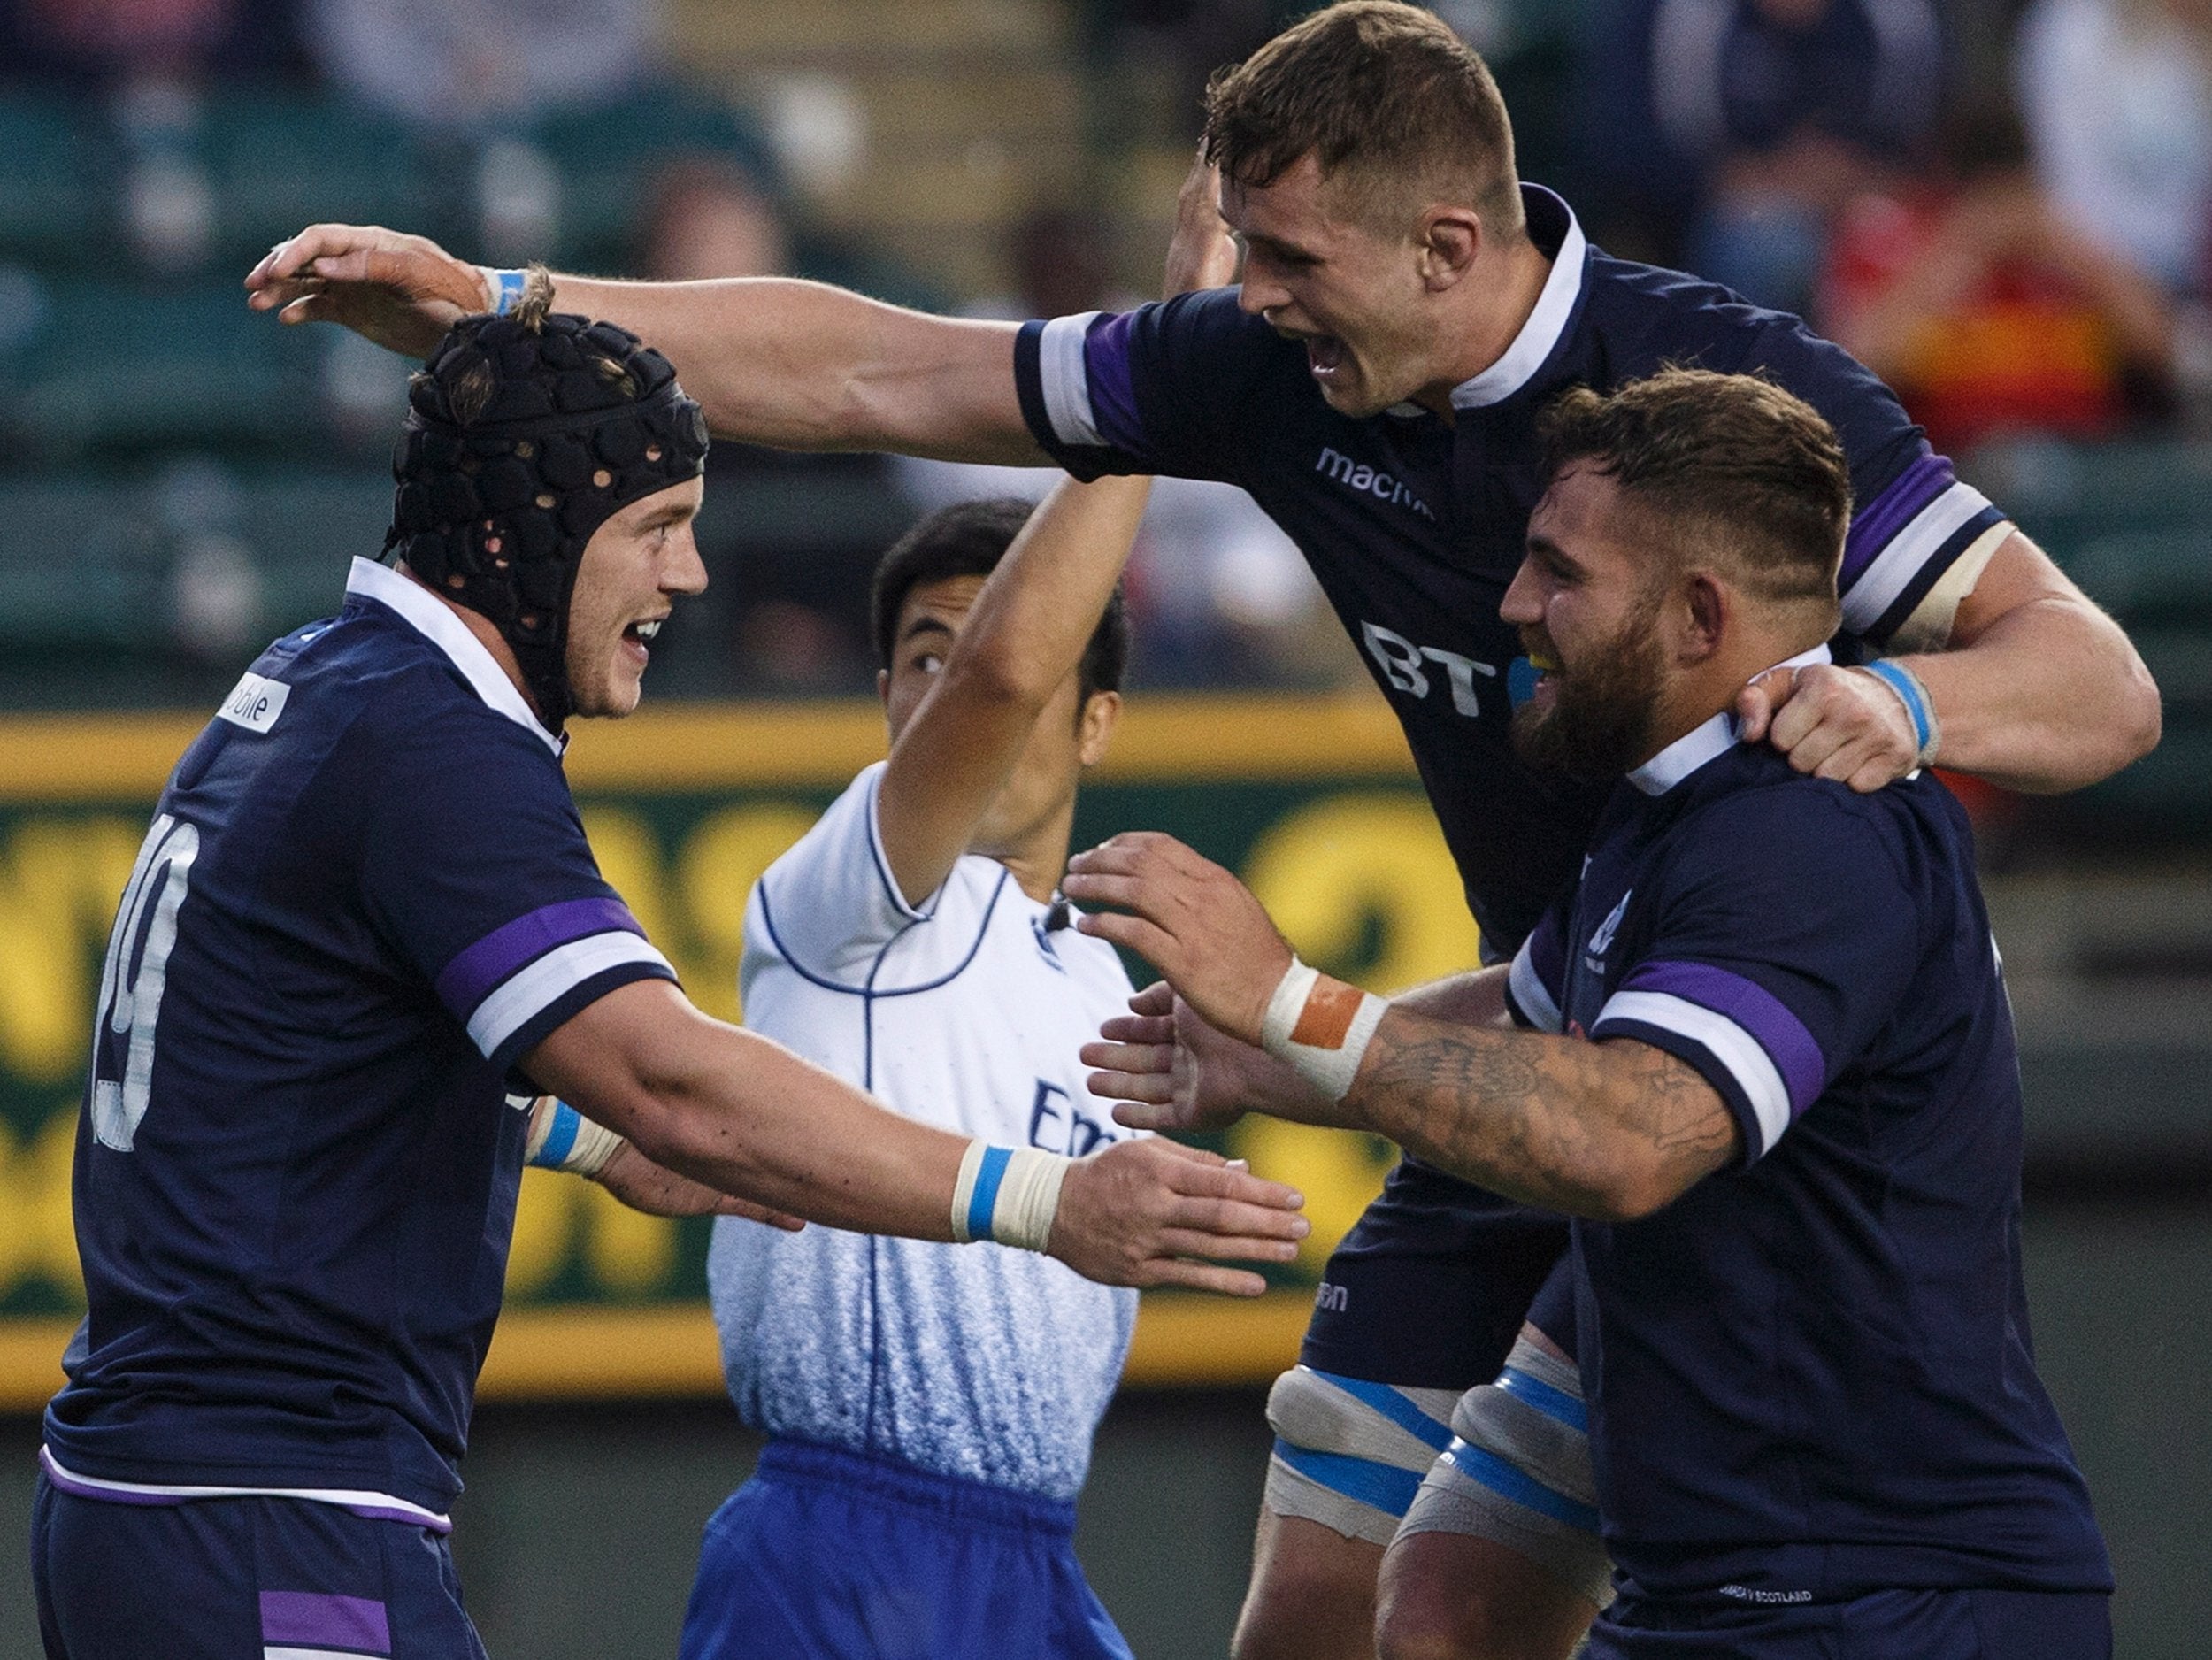 Scotland caped a successful summer with a landslide victory over Argentina